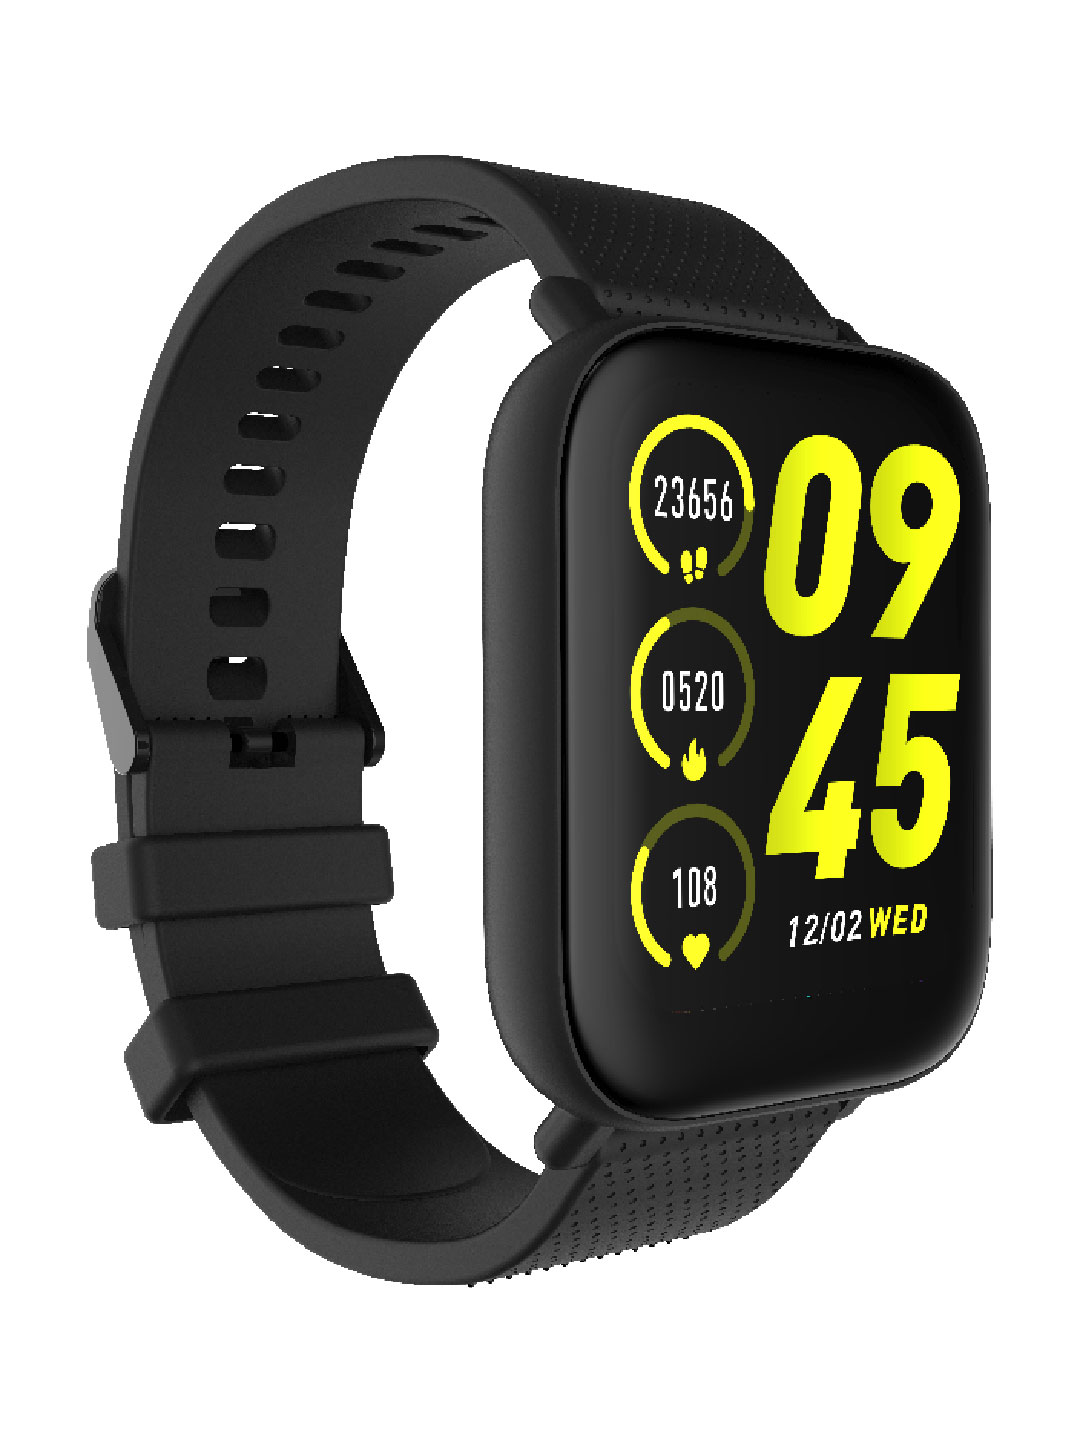 WINGS Strive 300 Smart Watch With Full Touch IPS Screen & IP68 Waterproof - Black Price in India